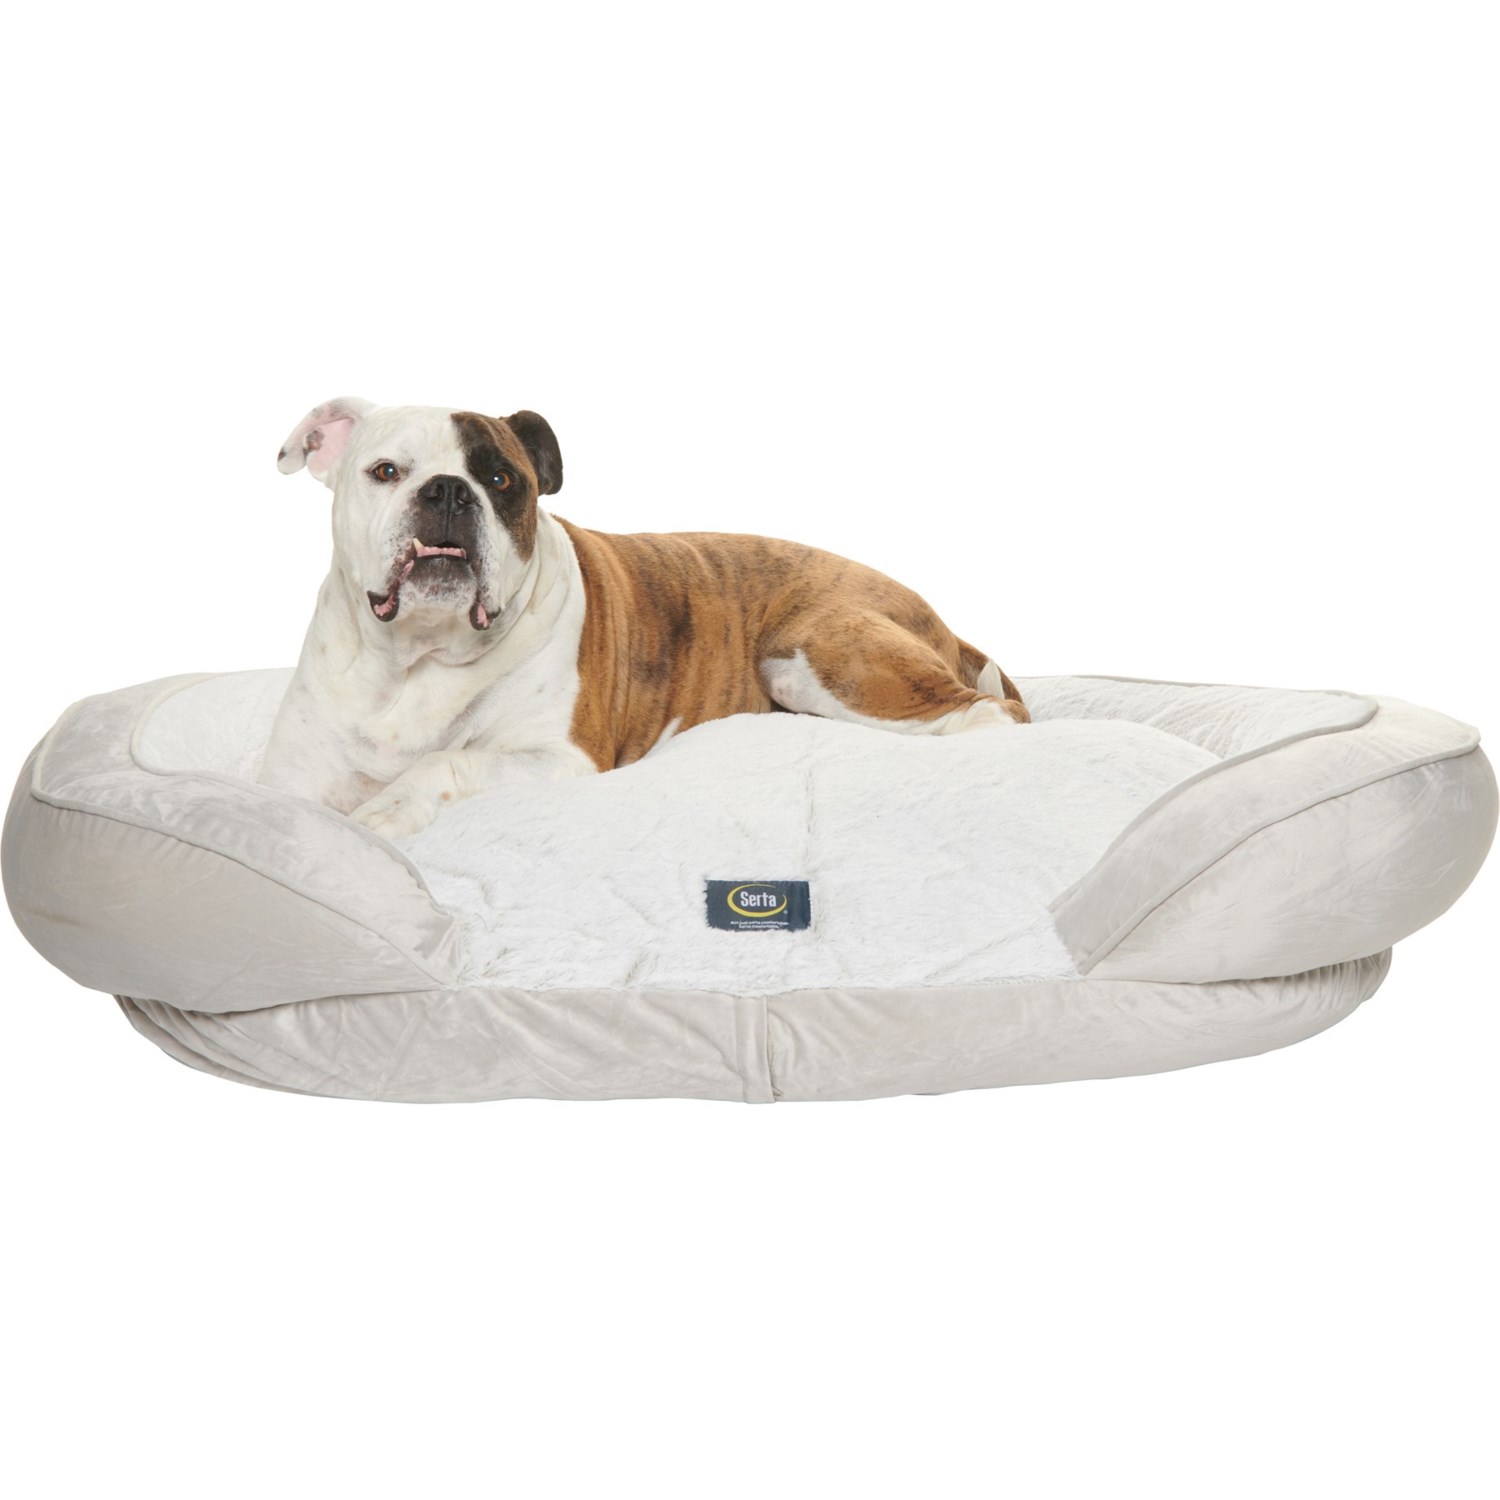 Serta Extra Large Oval Couch Dog Bed - 48x32”